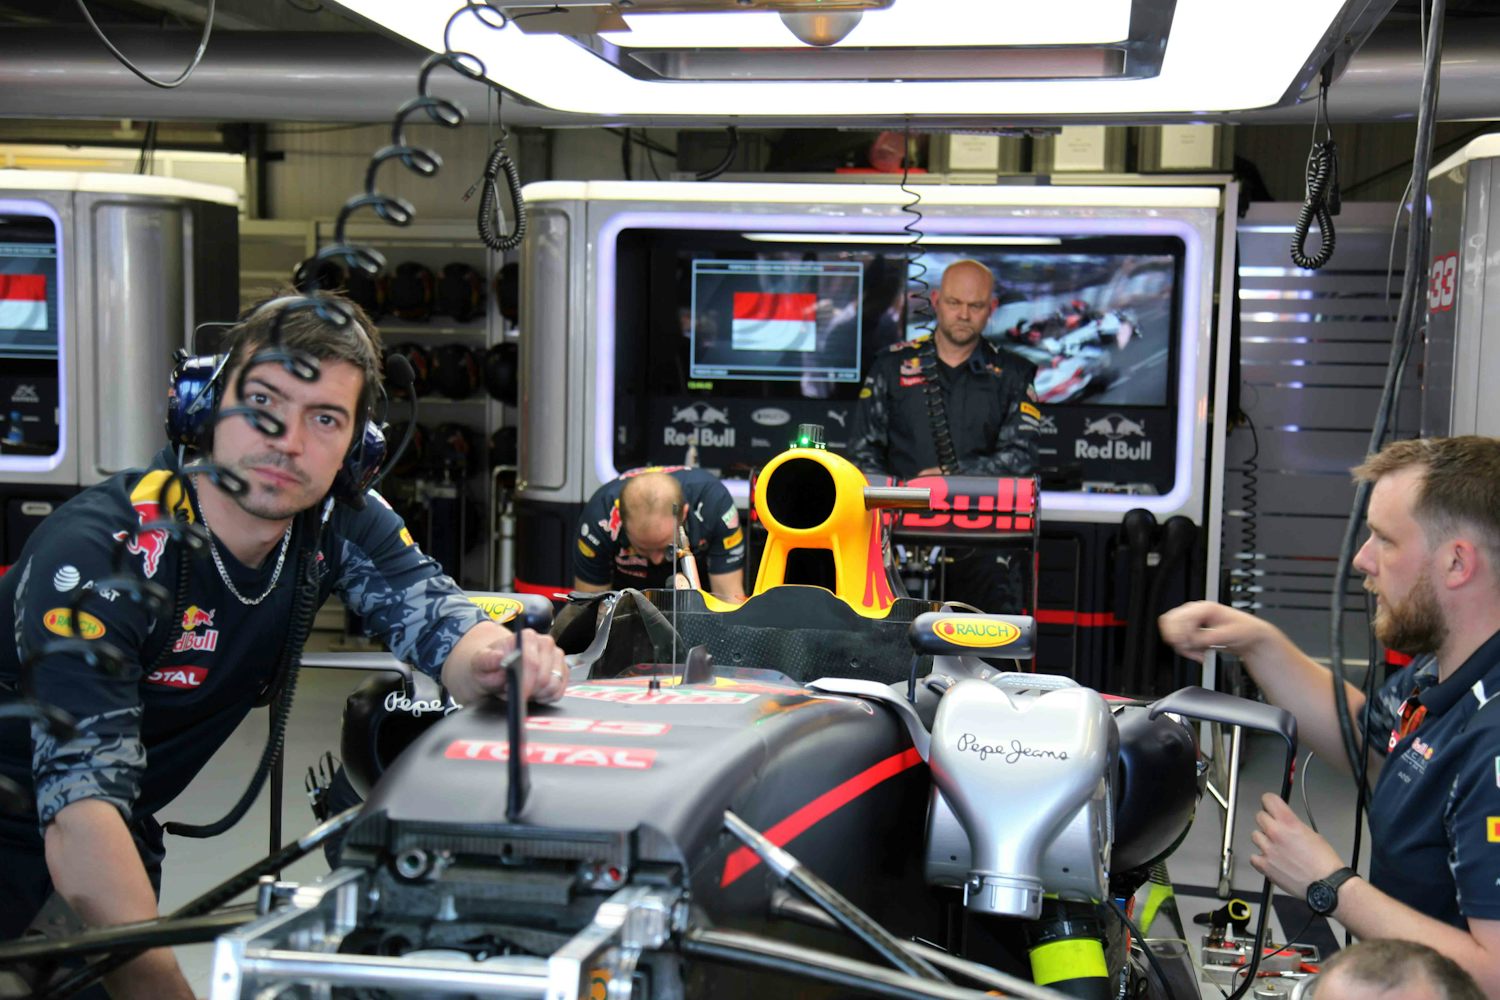 Inside the Red Bull Racing garage, probably seeing things I shouldn't. What a death stare!